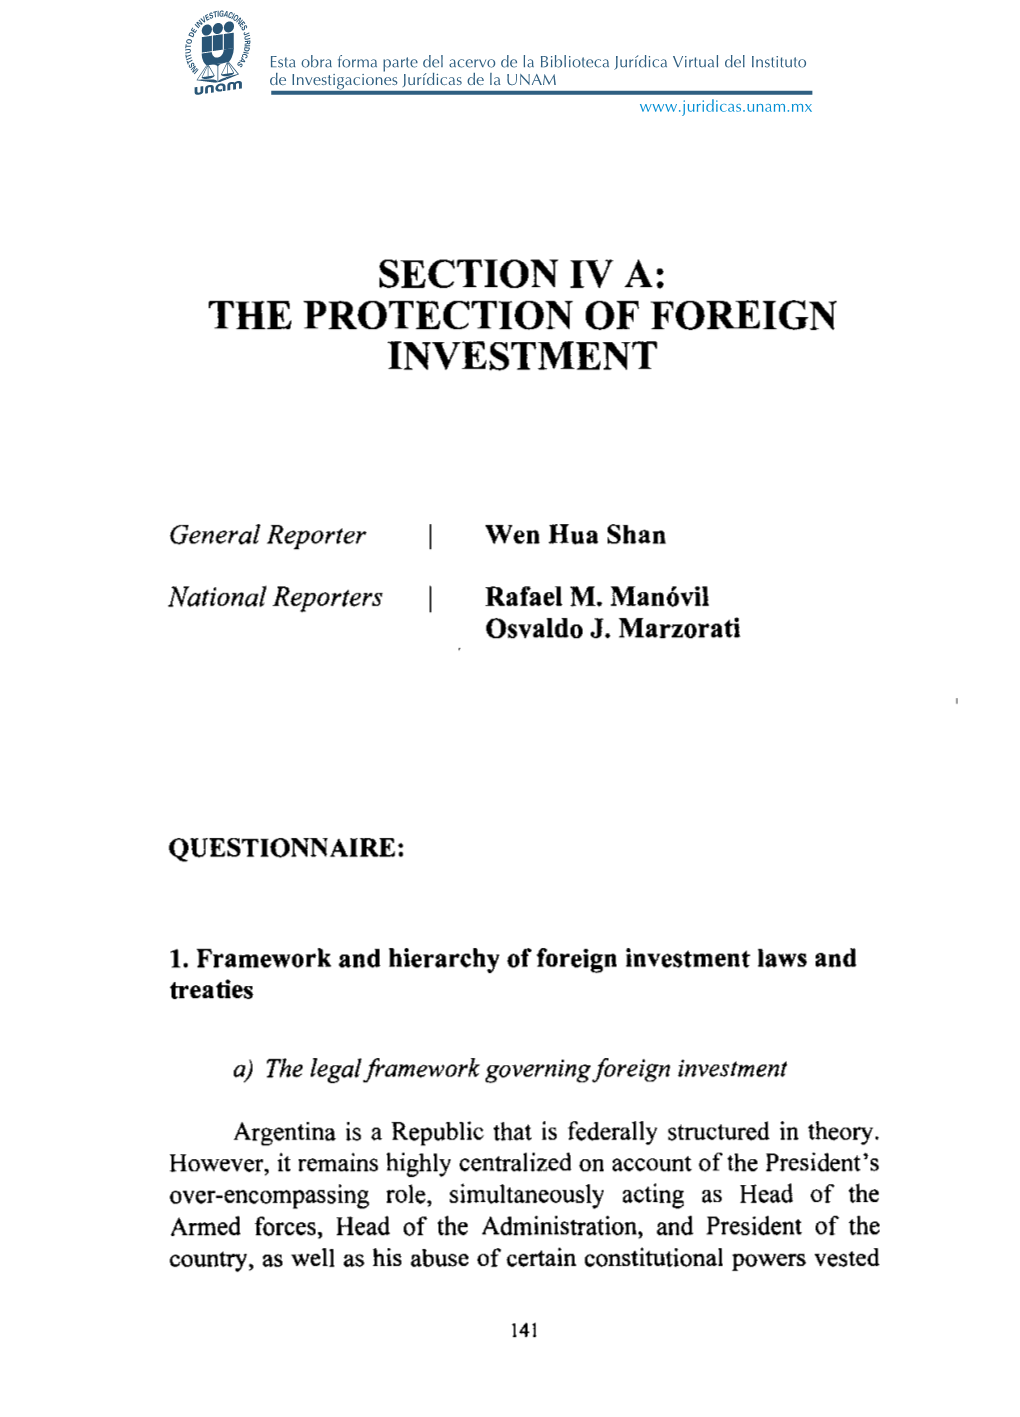 The Protection of Foreign Investment